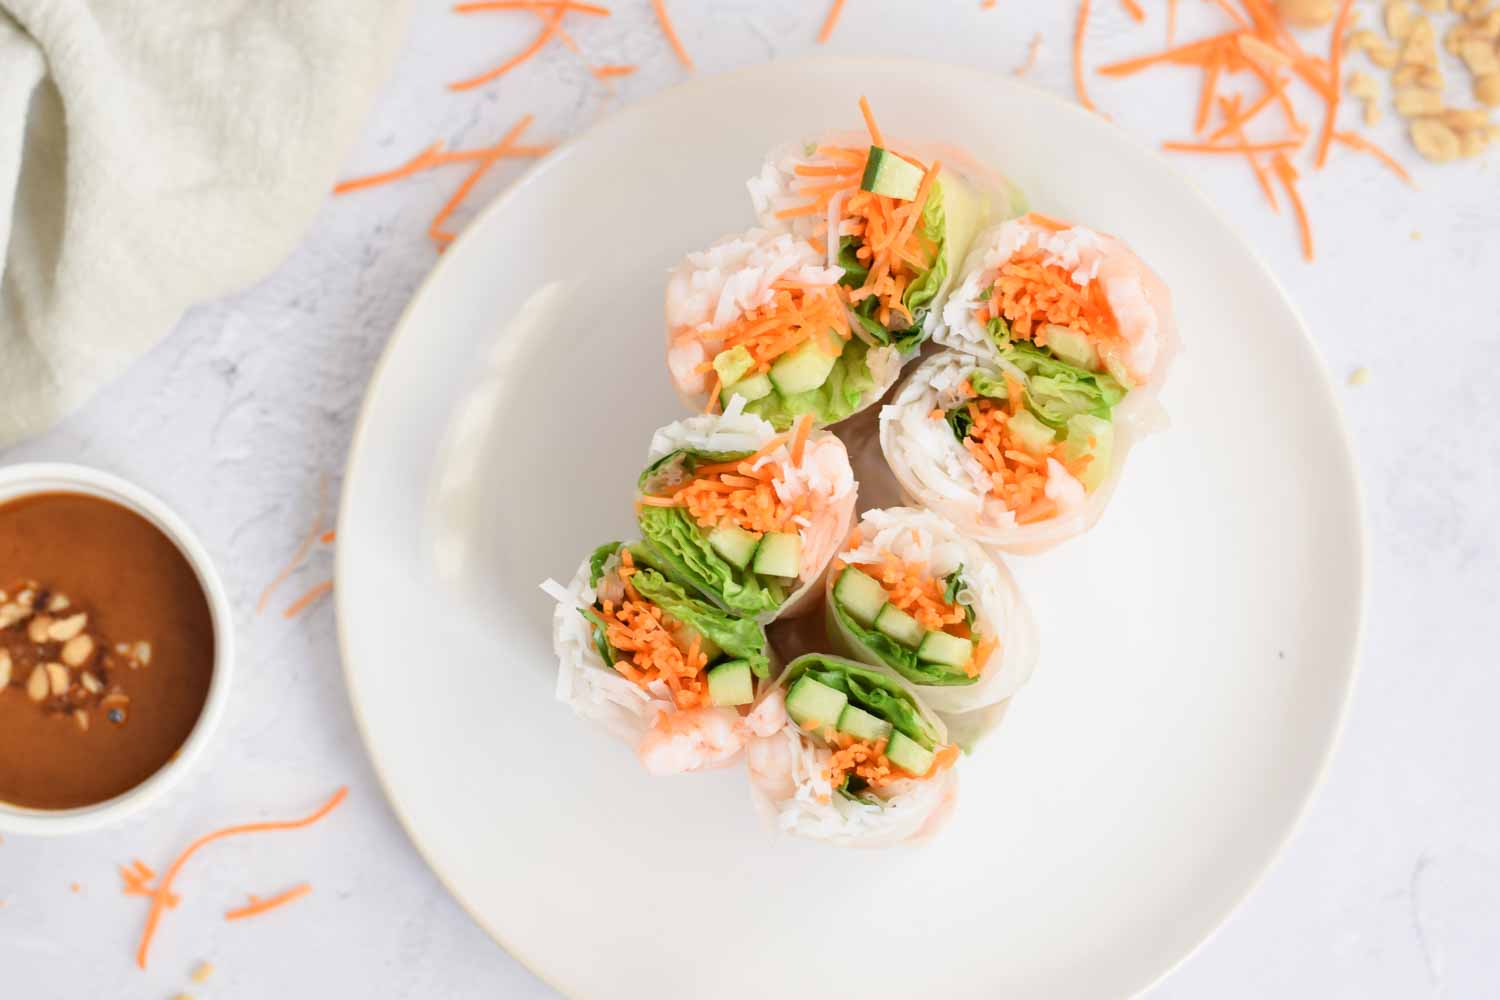 A plate of low FODMAP spring rolls with shrimp